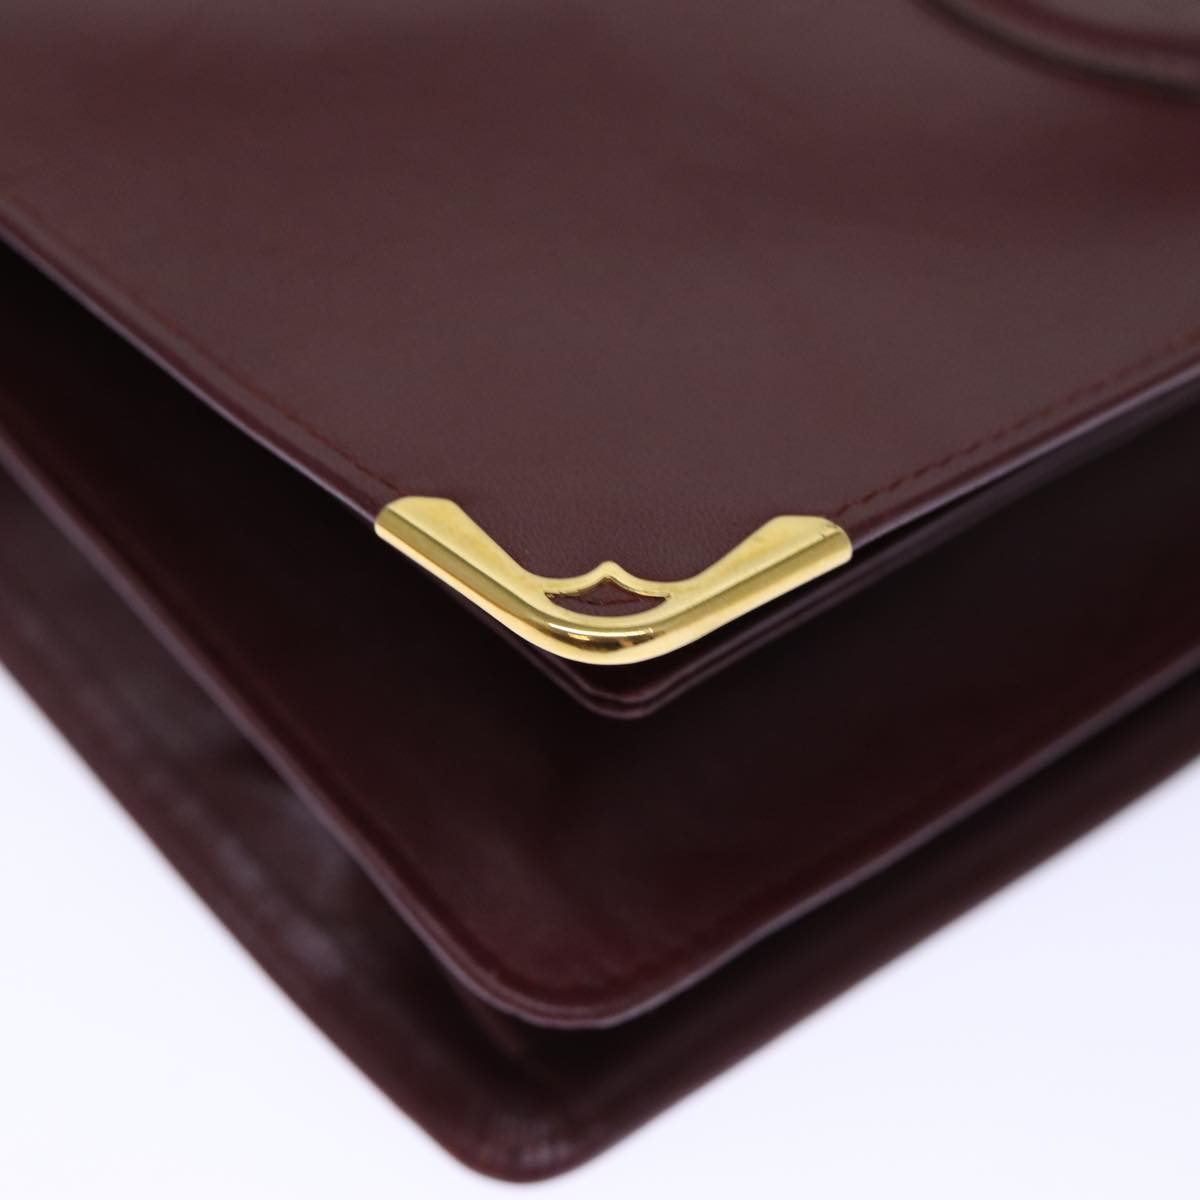 CARTIER Clutch Bag Leather Wine Red Auth bs13974